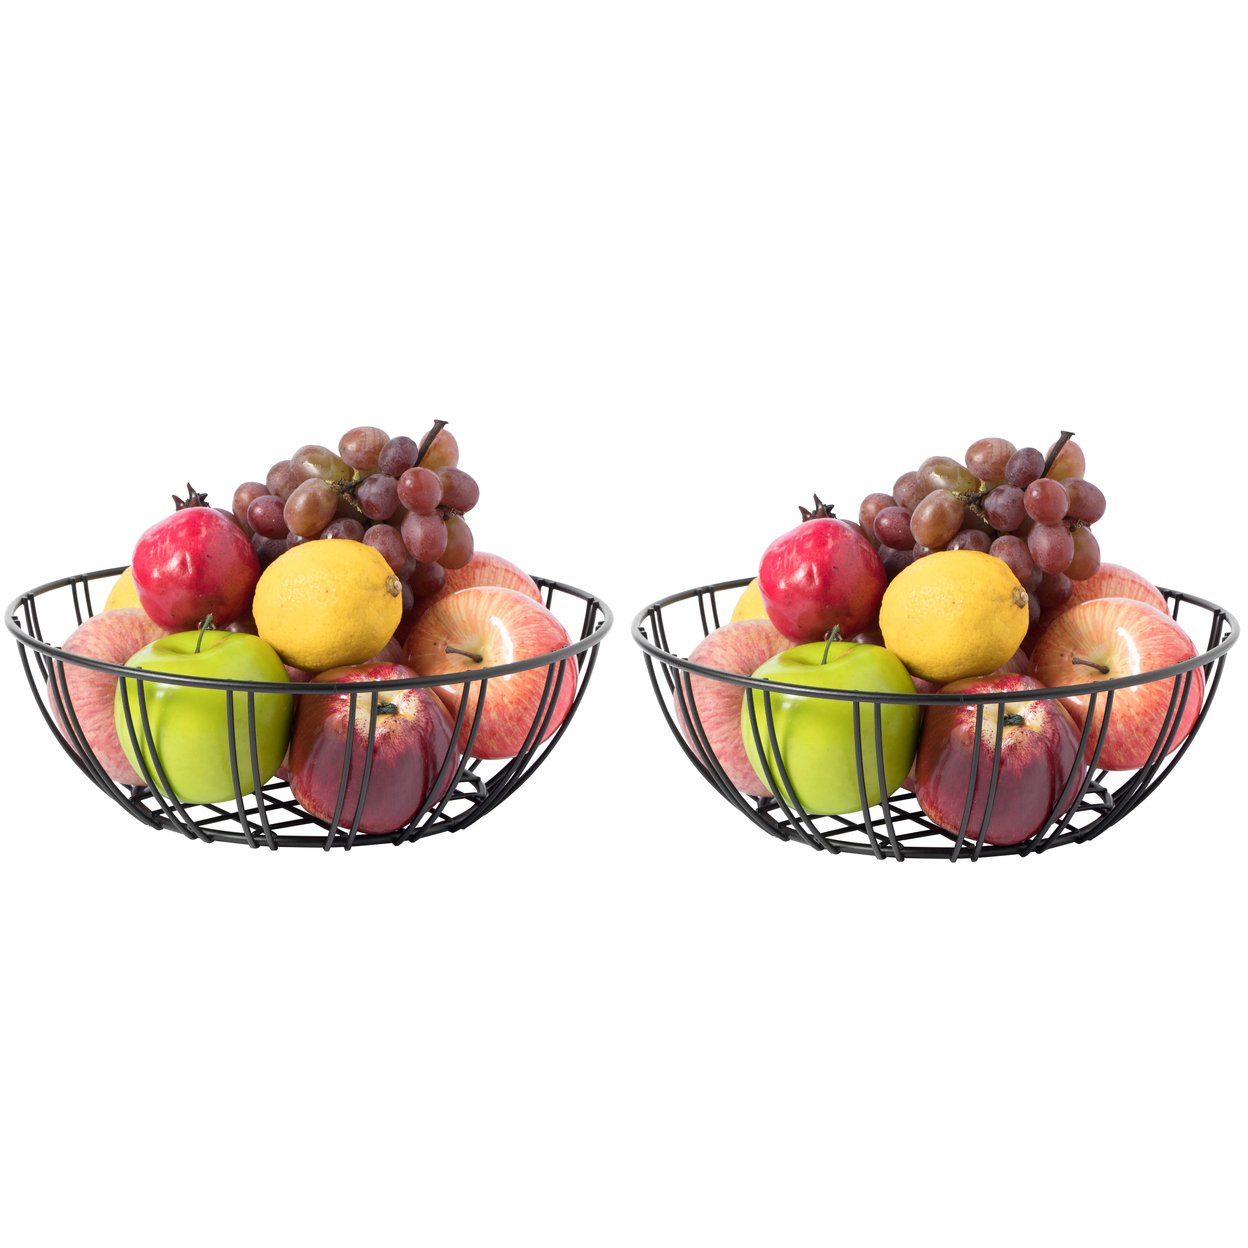 Black Iron Wire Fruit Bowl For Kitchen Counter, Storage Basket For Fruits, Vegetables, And Bread - Set Of 2